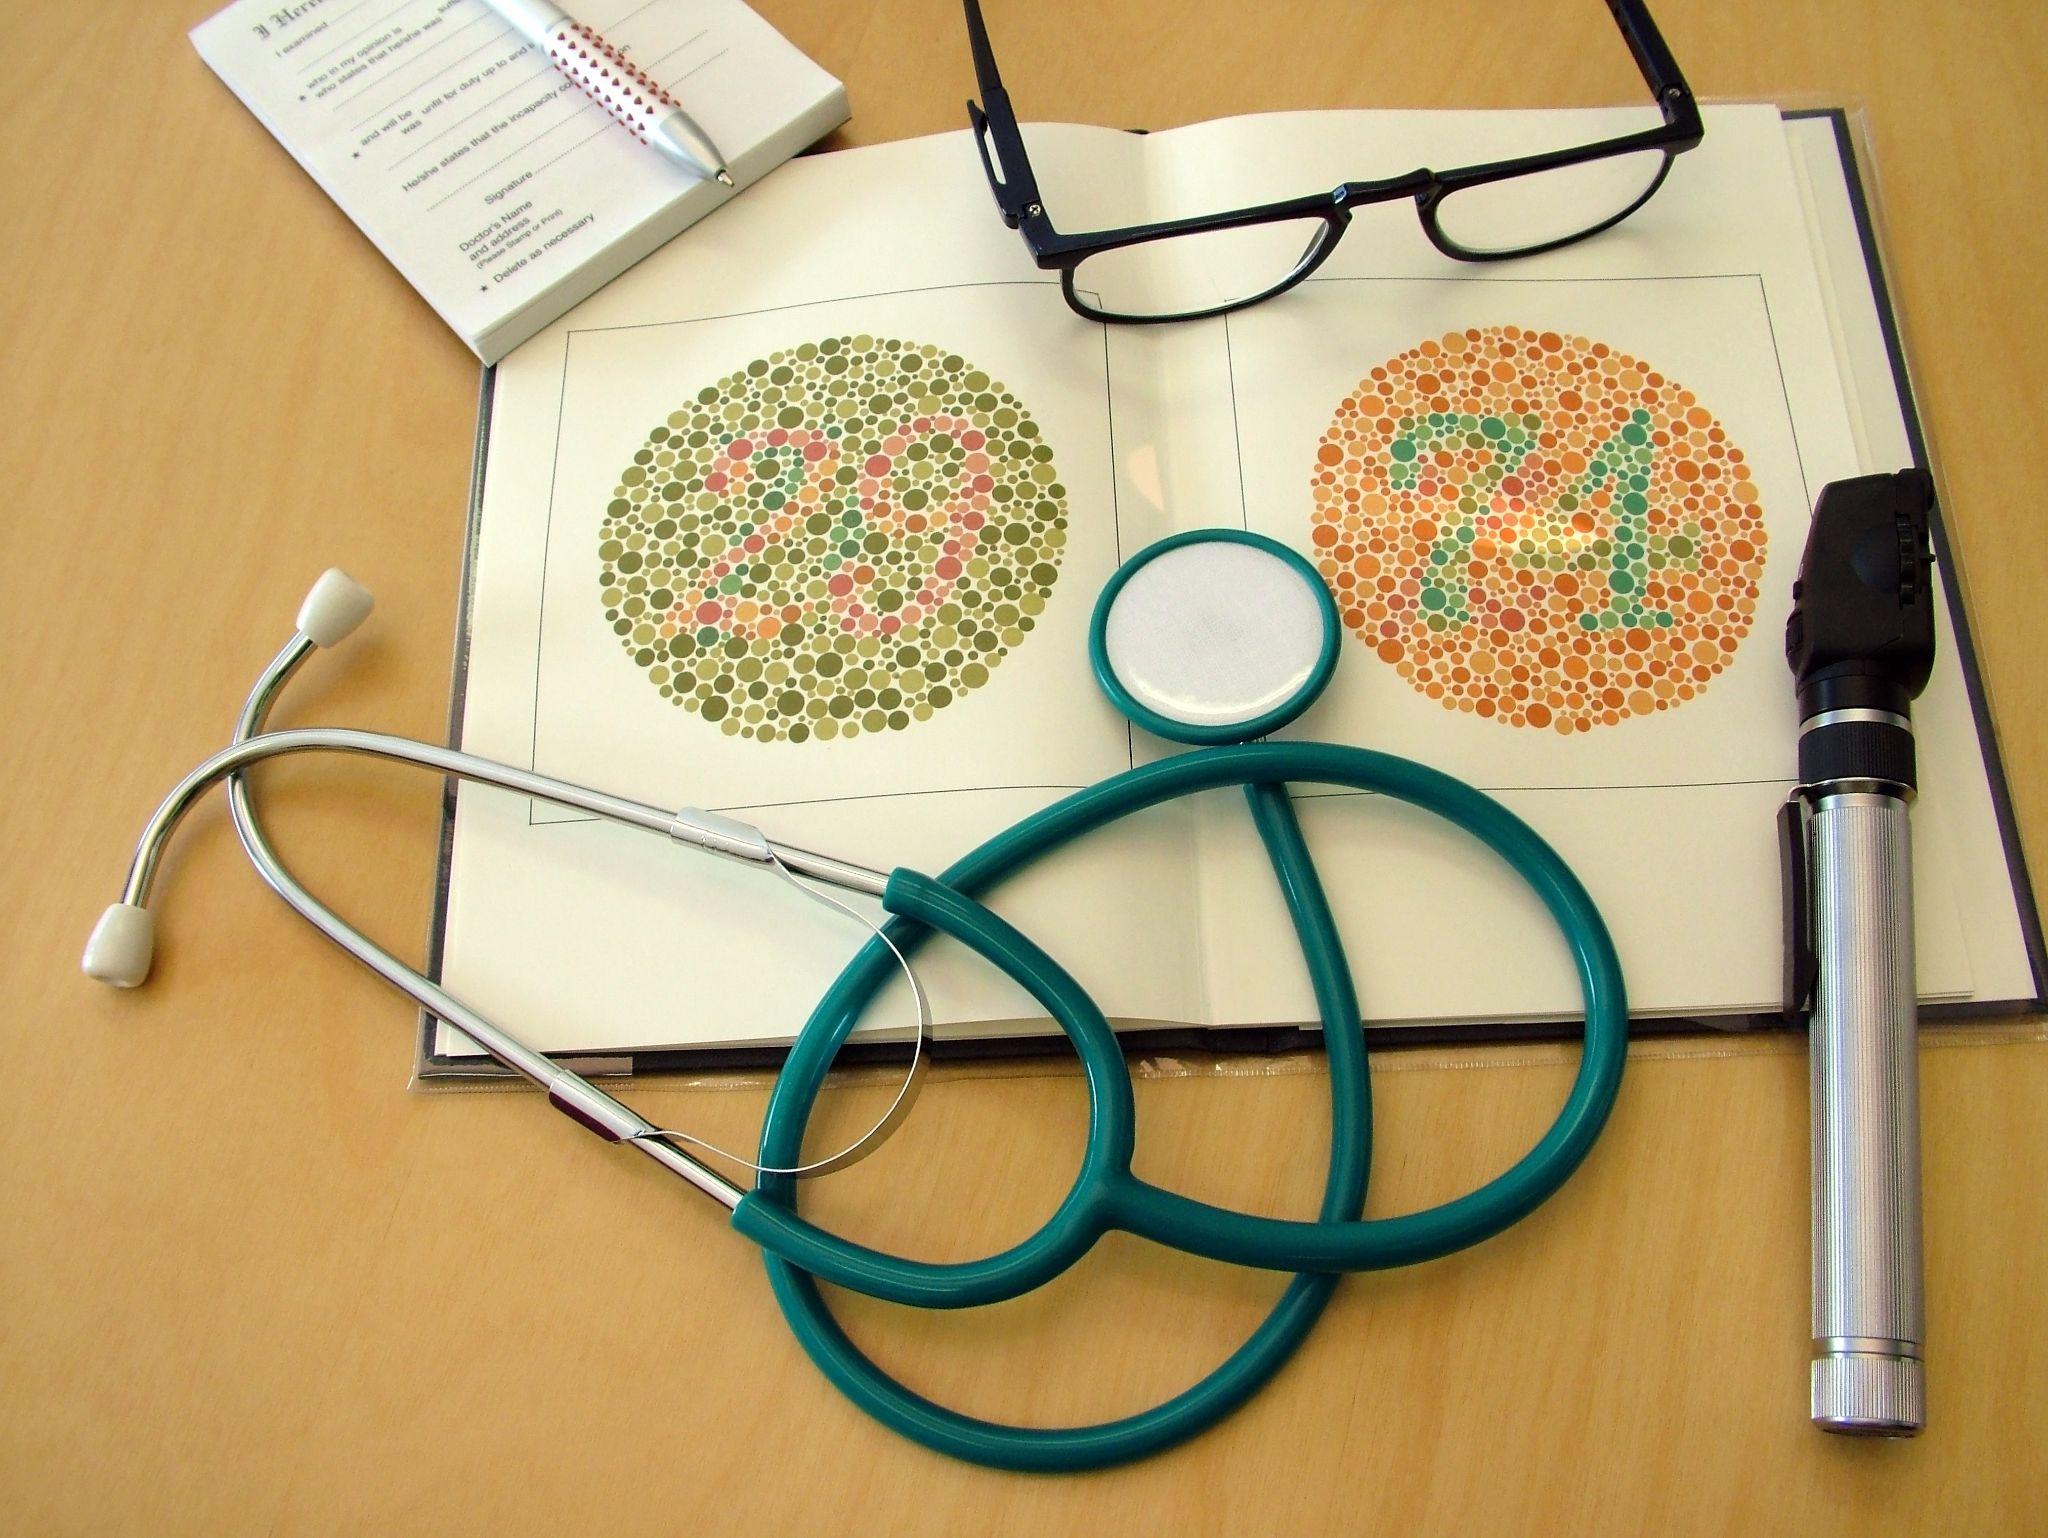 Medical equipment on wooden table with color blindness test booklet